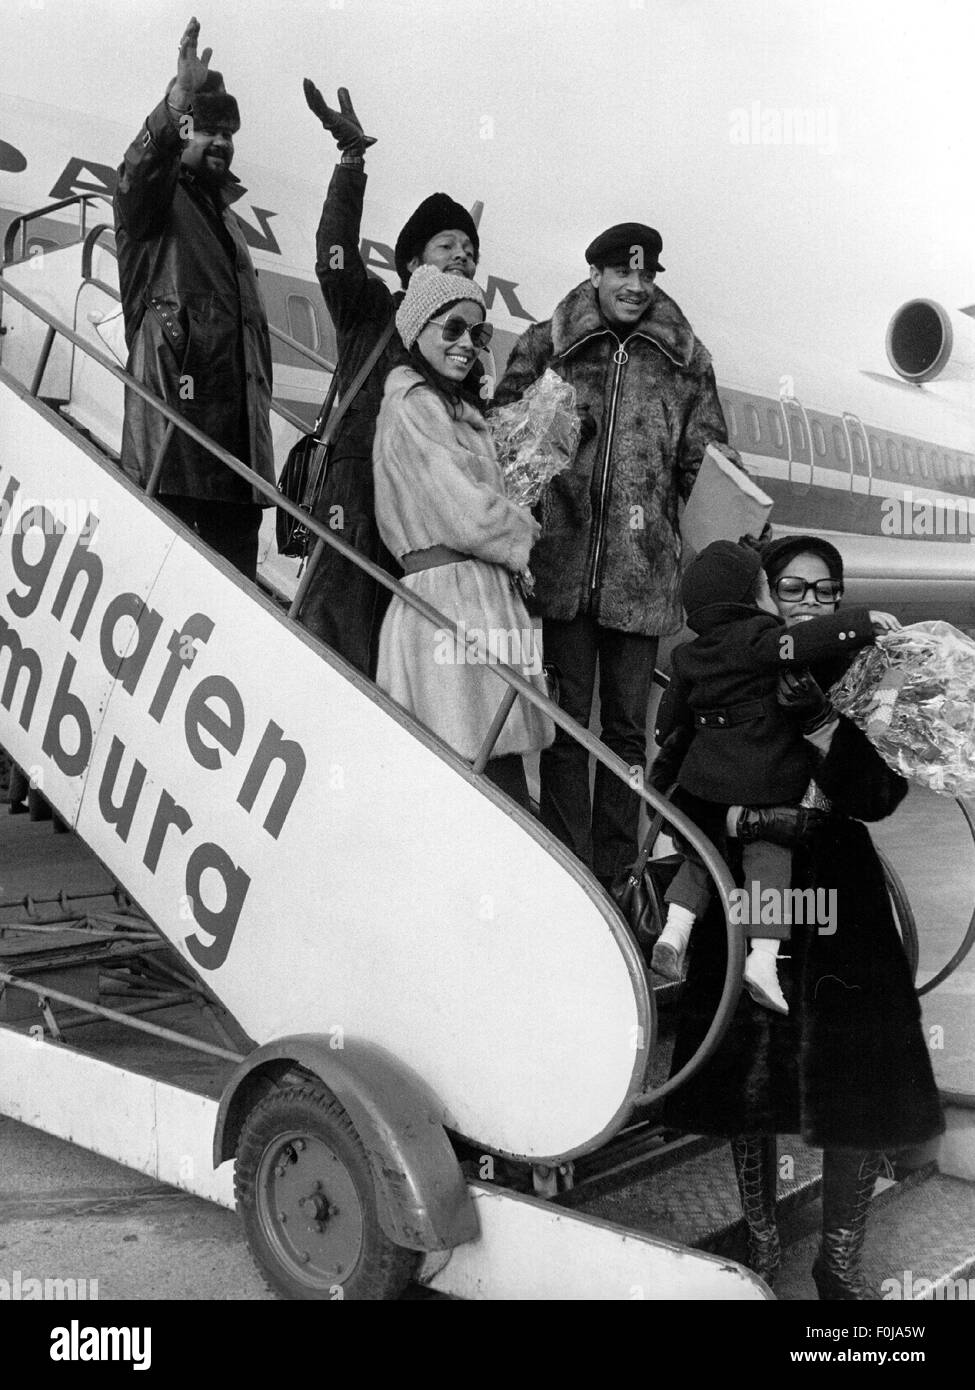 Fifth Dimension, The, American music group (soul), founded 1965, on gangway at arrival on airport, fltr: Ron Townson, Lamonte McLemore, Marilyn McCoo, Billy Davis Jr., Florence LaRue, Hamburg, 1972, Stock Photo